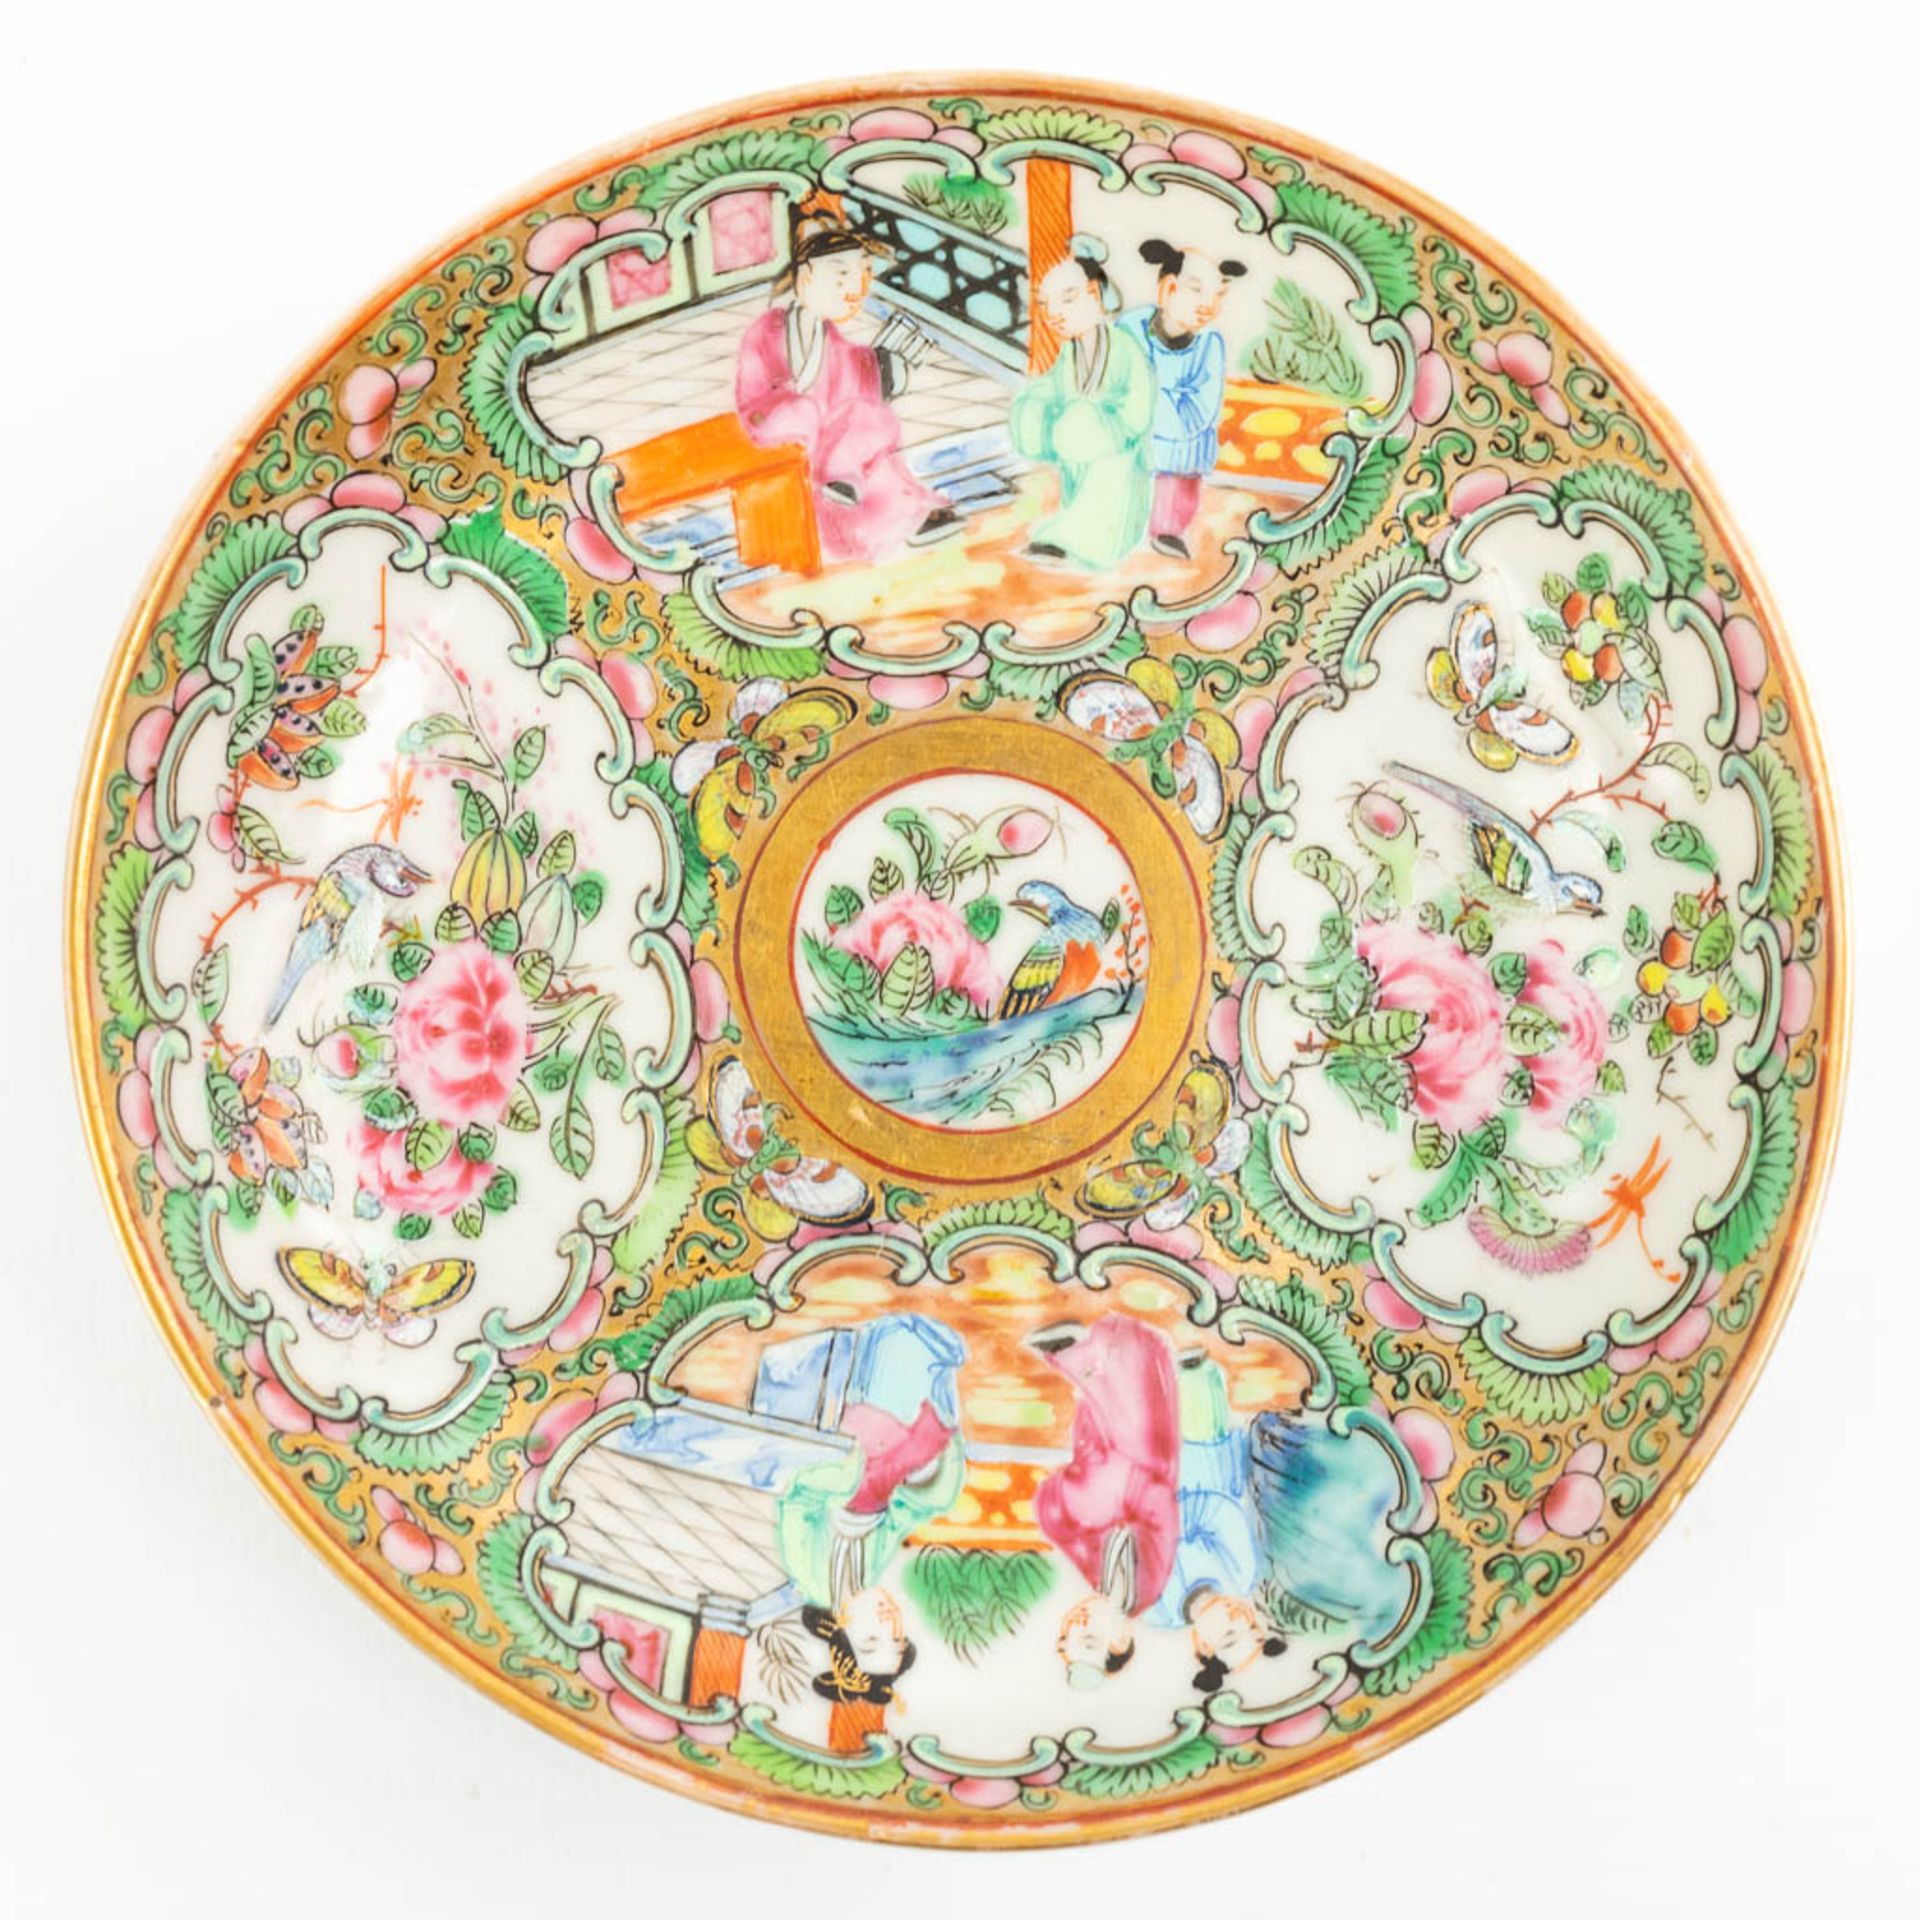 A collection of 5 plates made of Chinese porcelain with different patterns. - Image 7 of 15